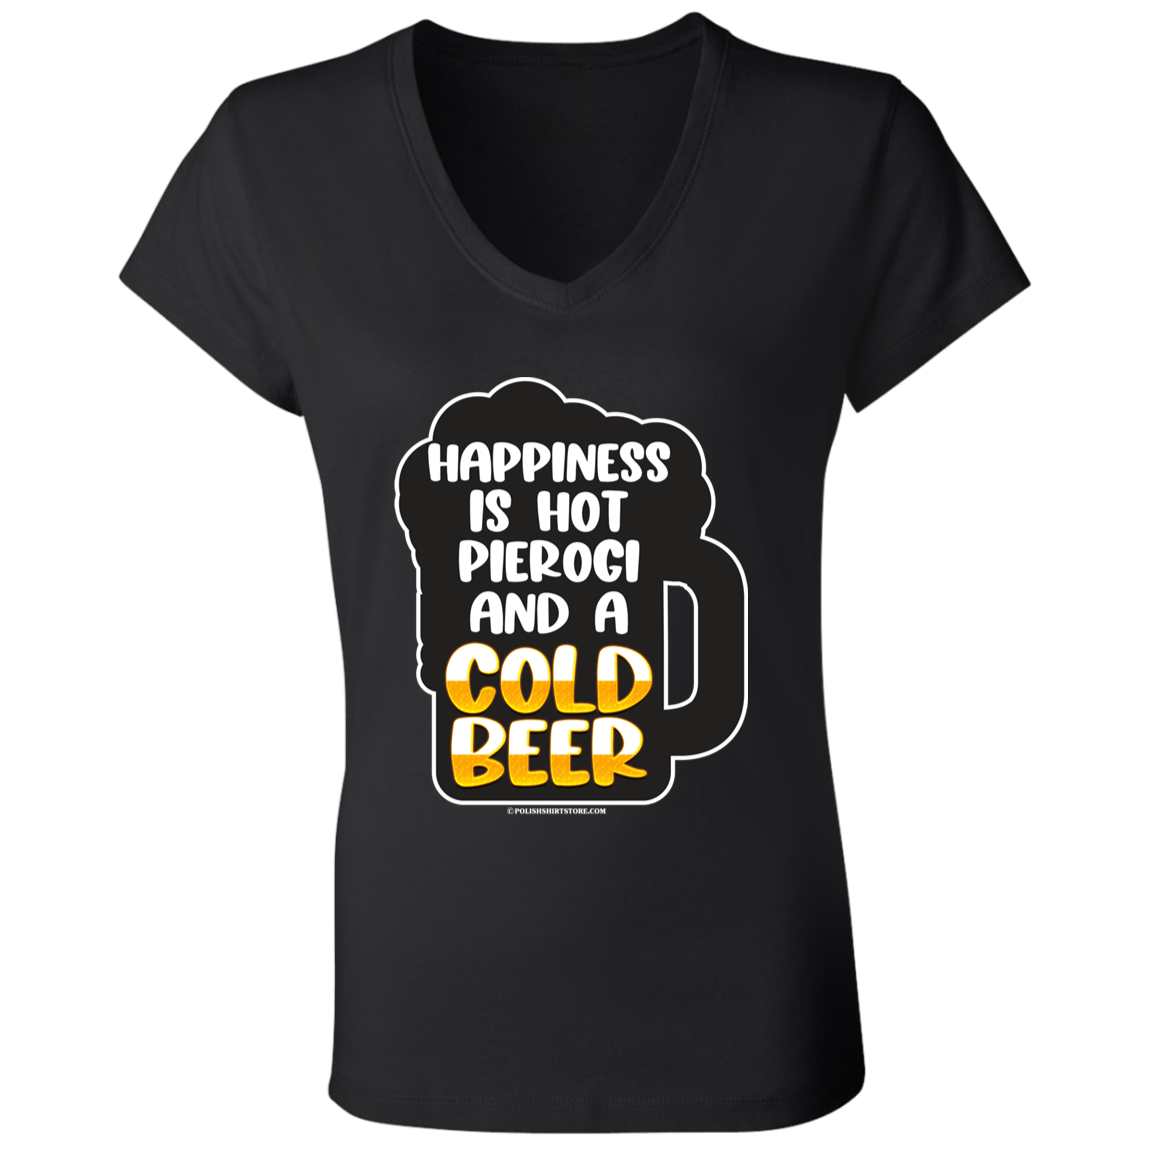 Happiness Is Hot Pierogi And A Cold Beer Apparel CustomCat B6005 Ladies' Jersey V-Neck T-Shirt Black S